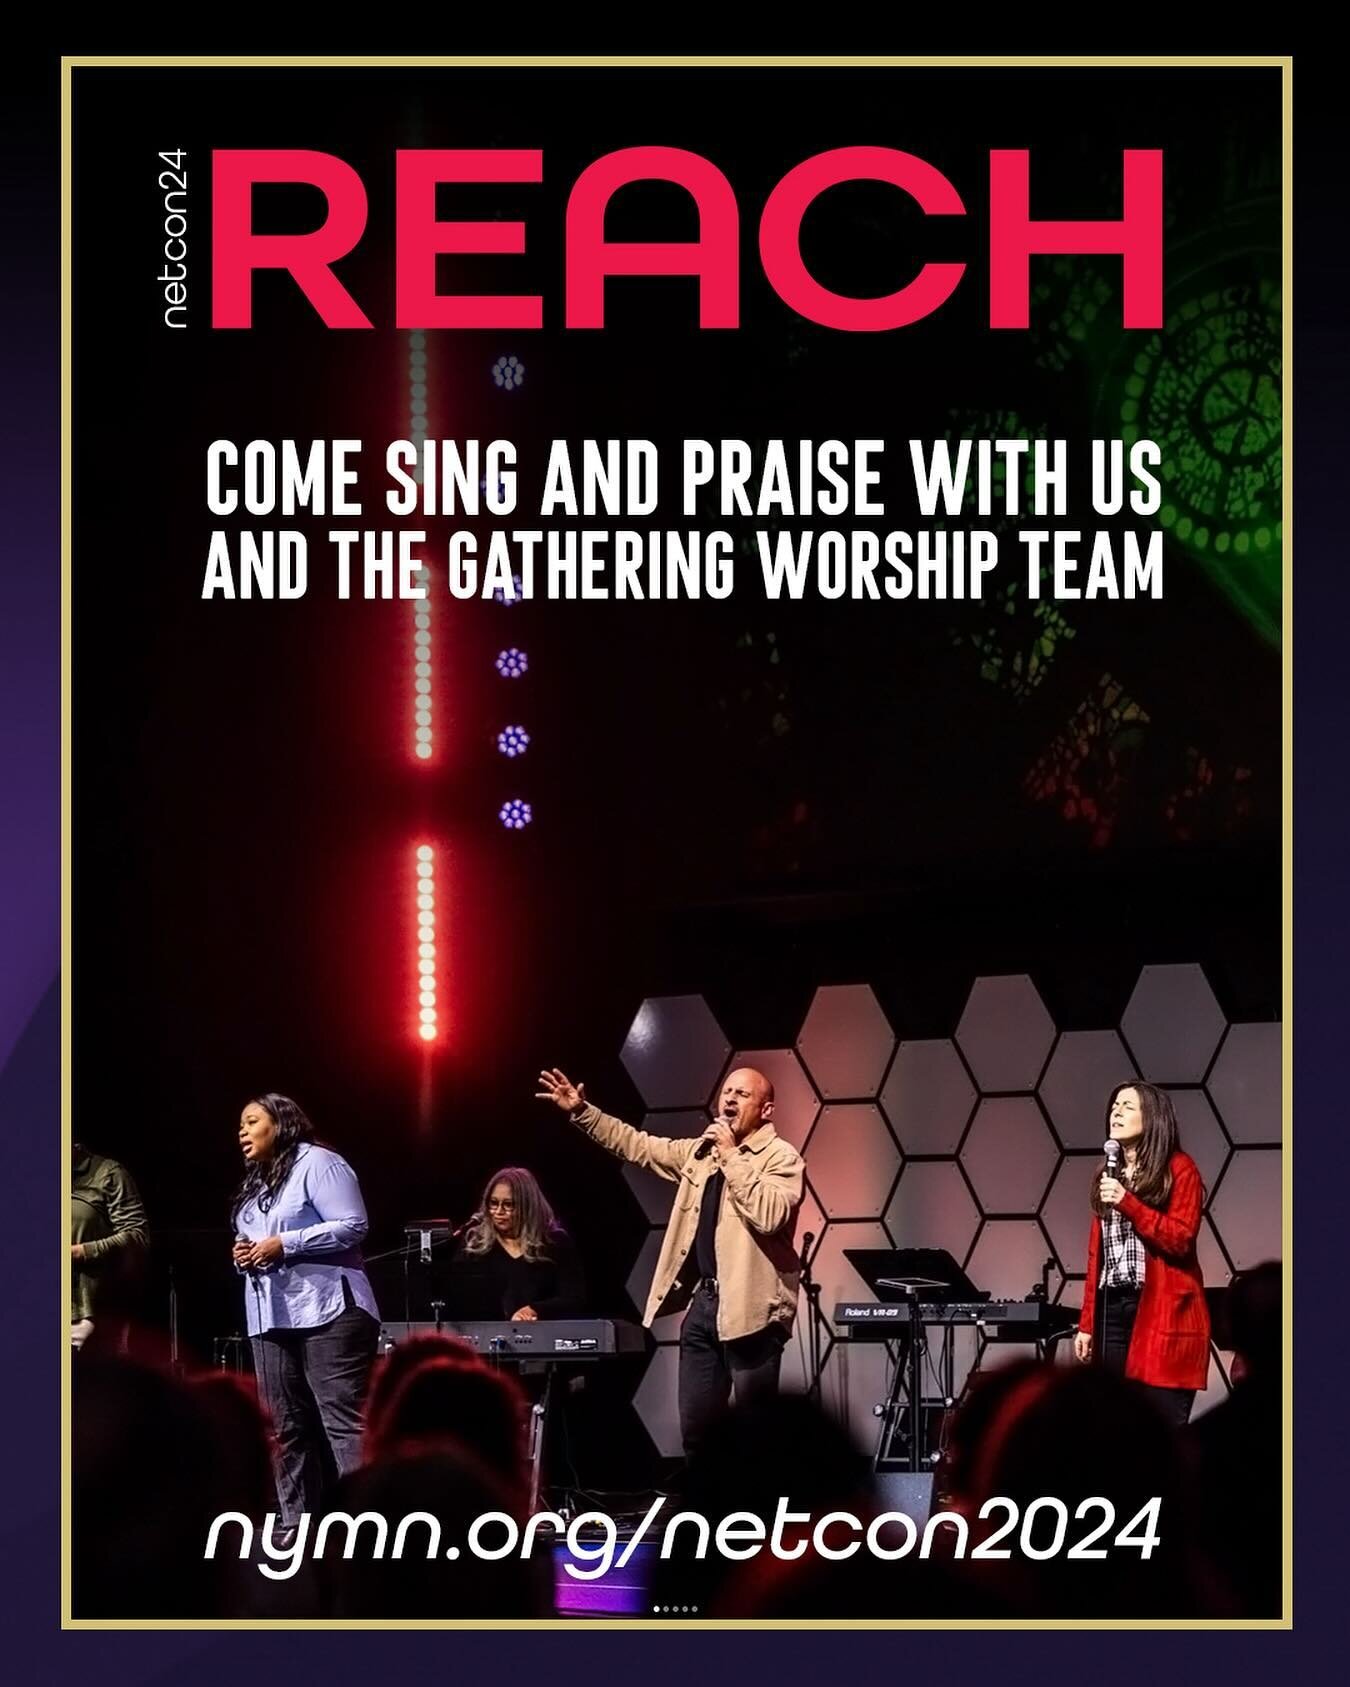 Get ready to lift your voice and heart in praise at NetCon24! Whether you love to sing, or simply want to soak in the atmosphere of praise come celebrate with us. Take a moment to register now at NYMN.org/netcon2024